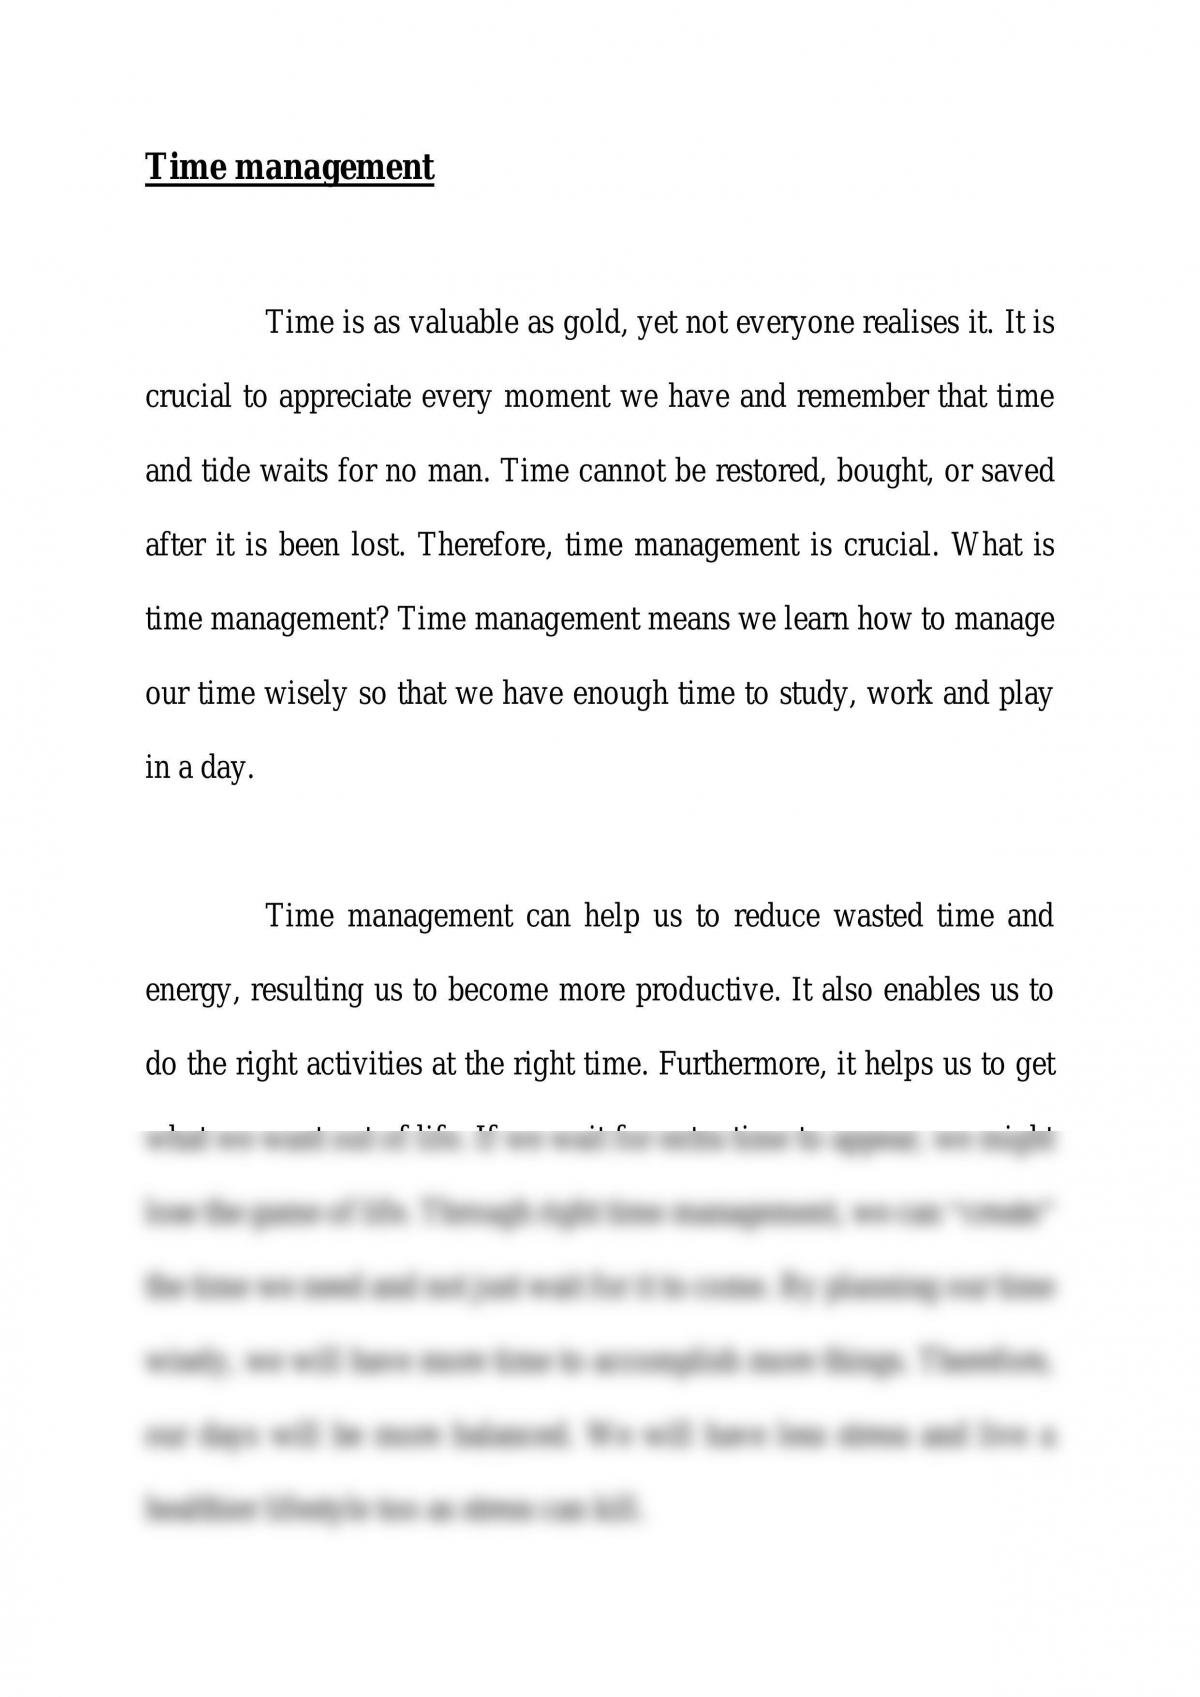 write an expository essay on time management pdf